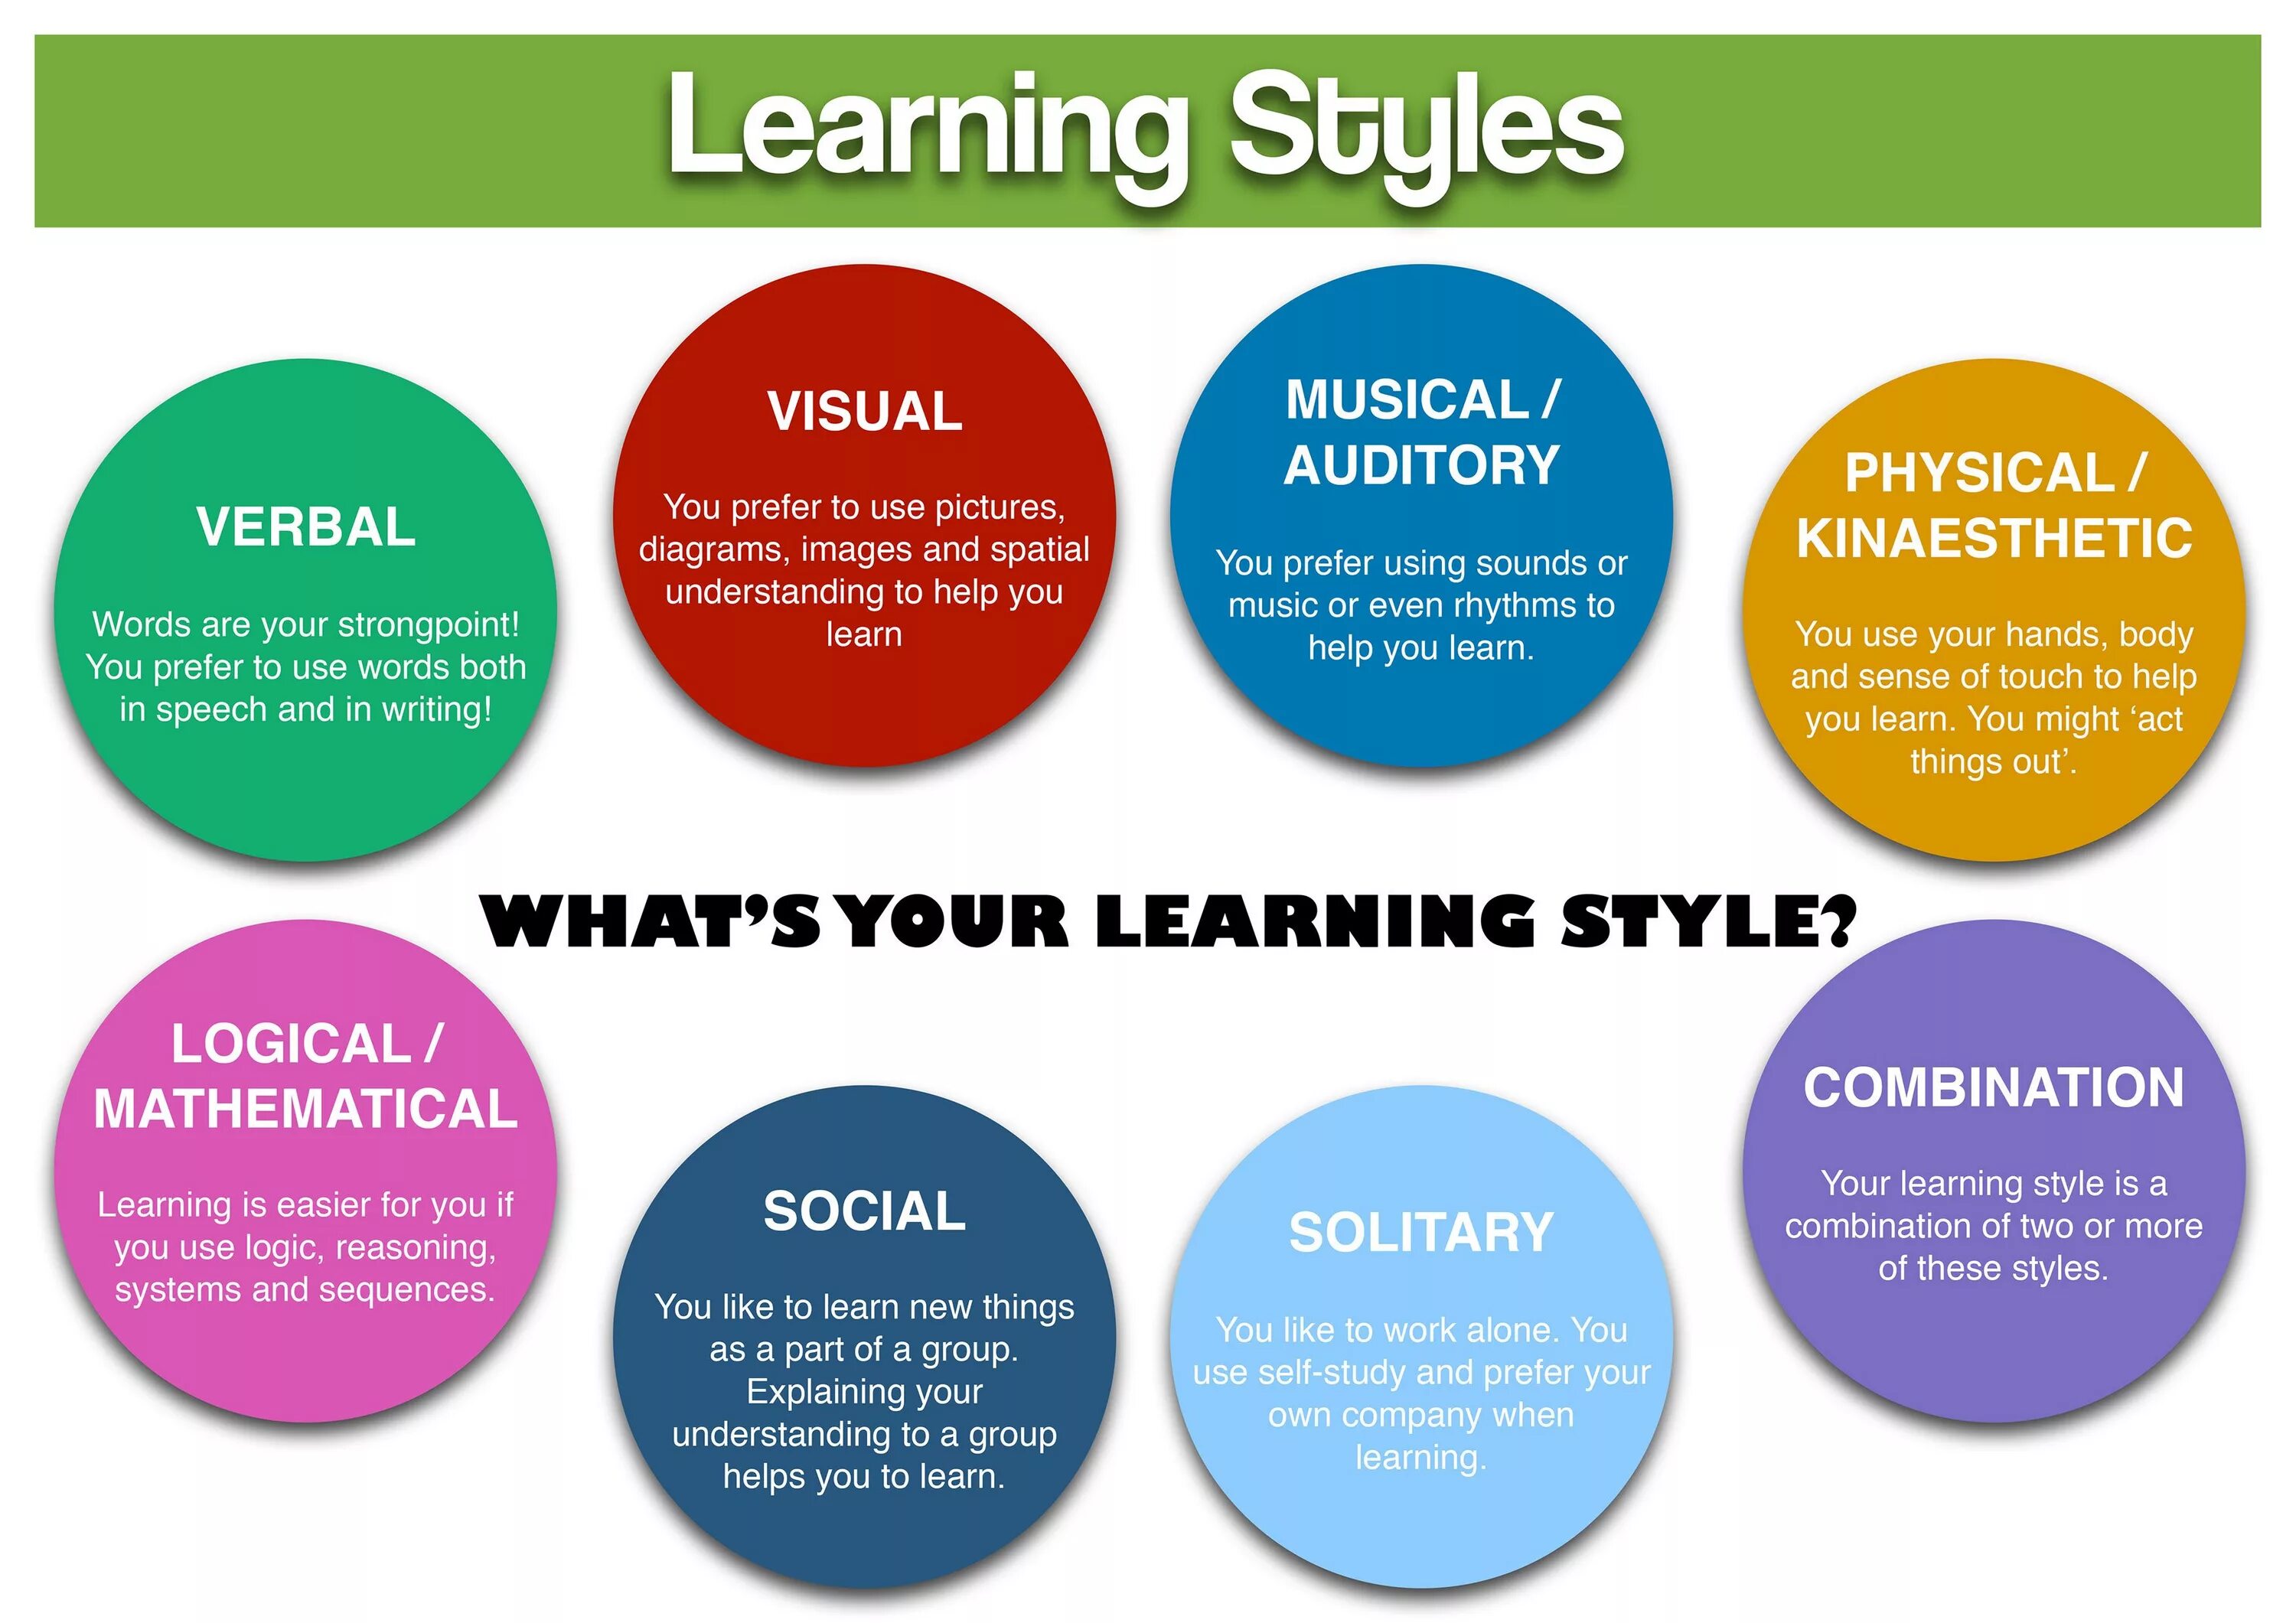 Questioning theory. Learning Styles. Types of Learning Styles. Different Learning Styles. Learning Styles and Strategies.